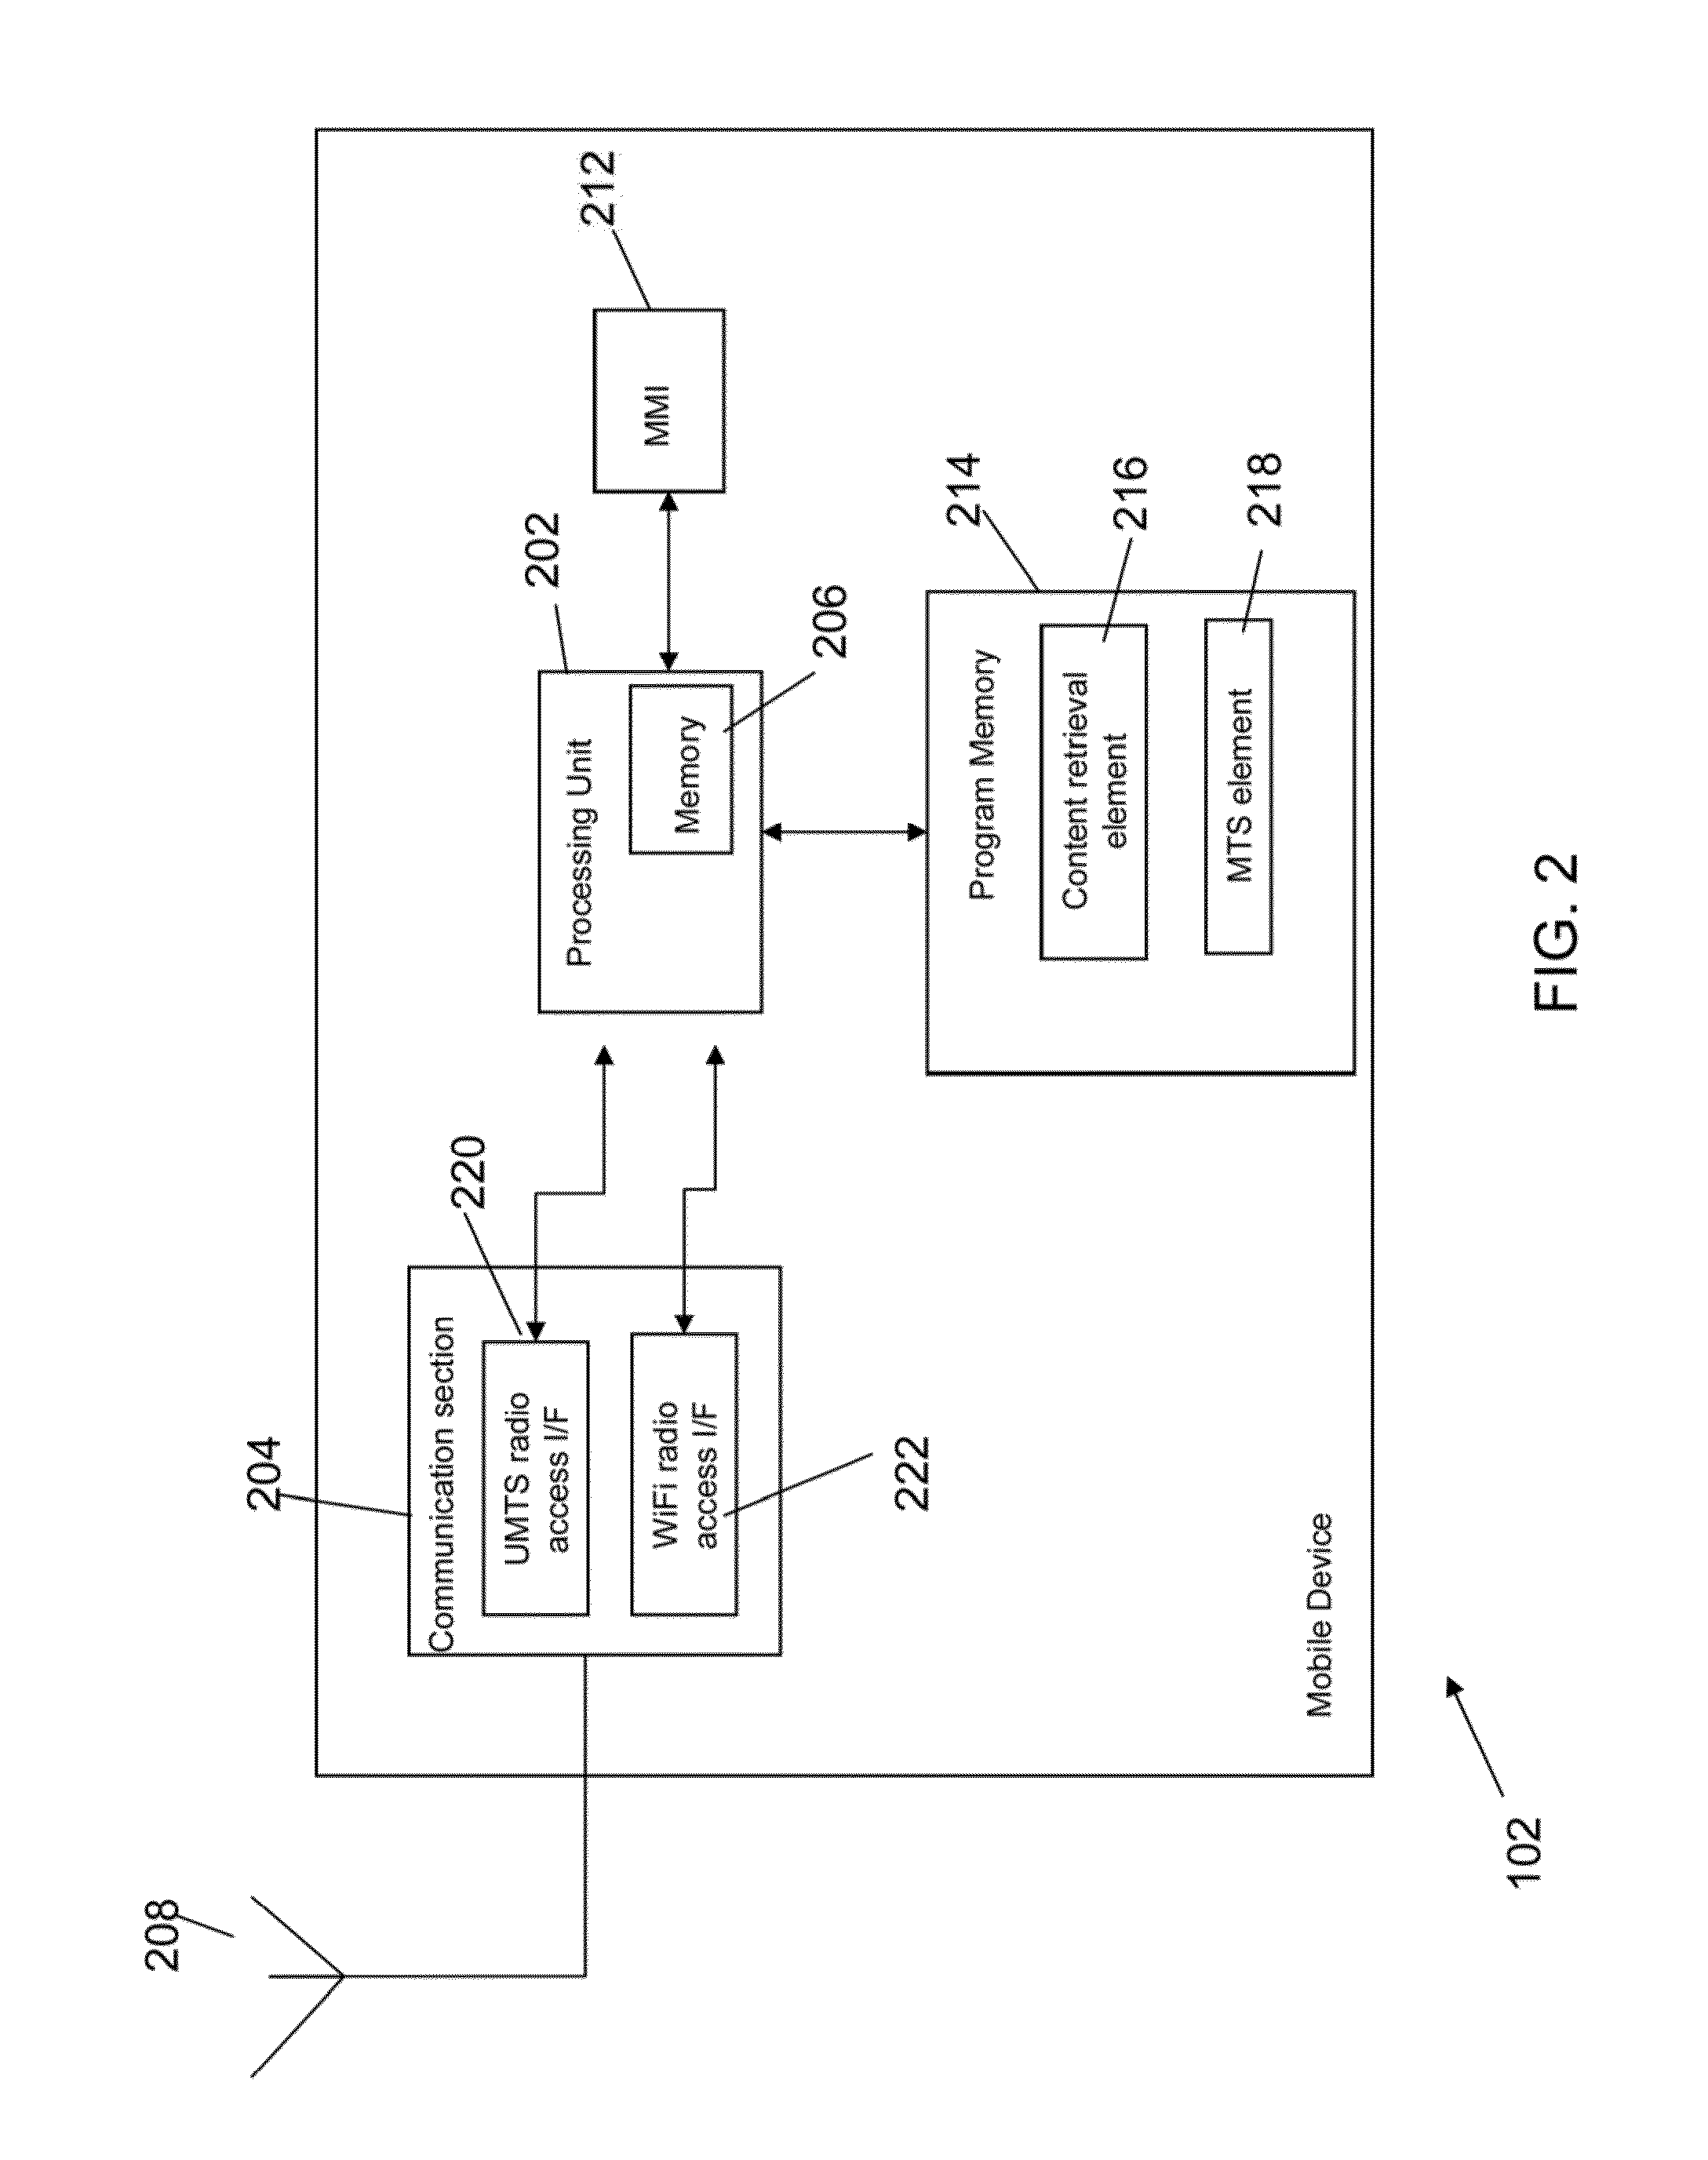 Method for retrieving content by a wireless communication device having first and secod radio access interfaces, wireless communication device and communication system